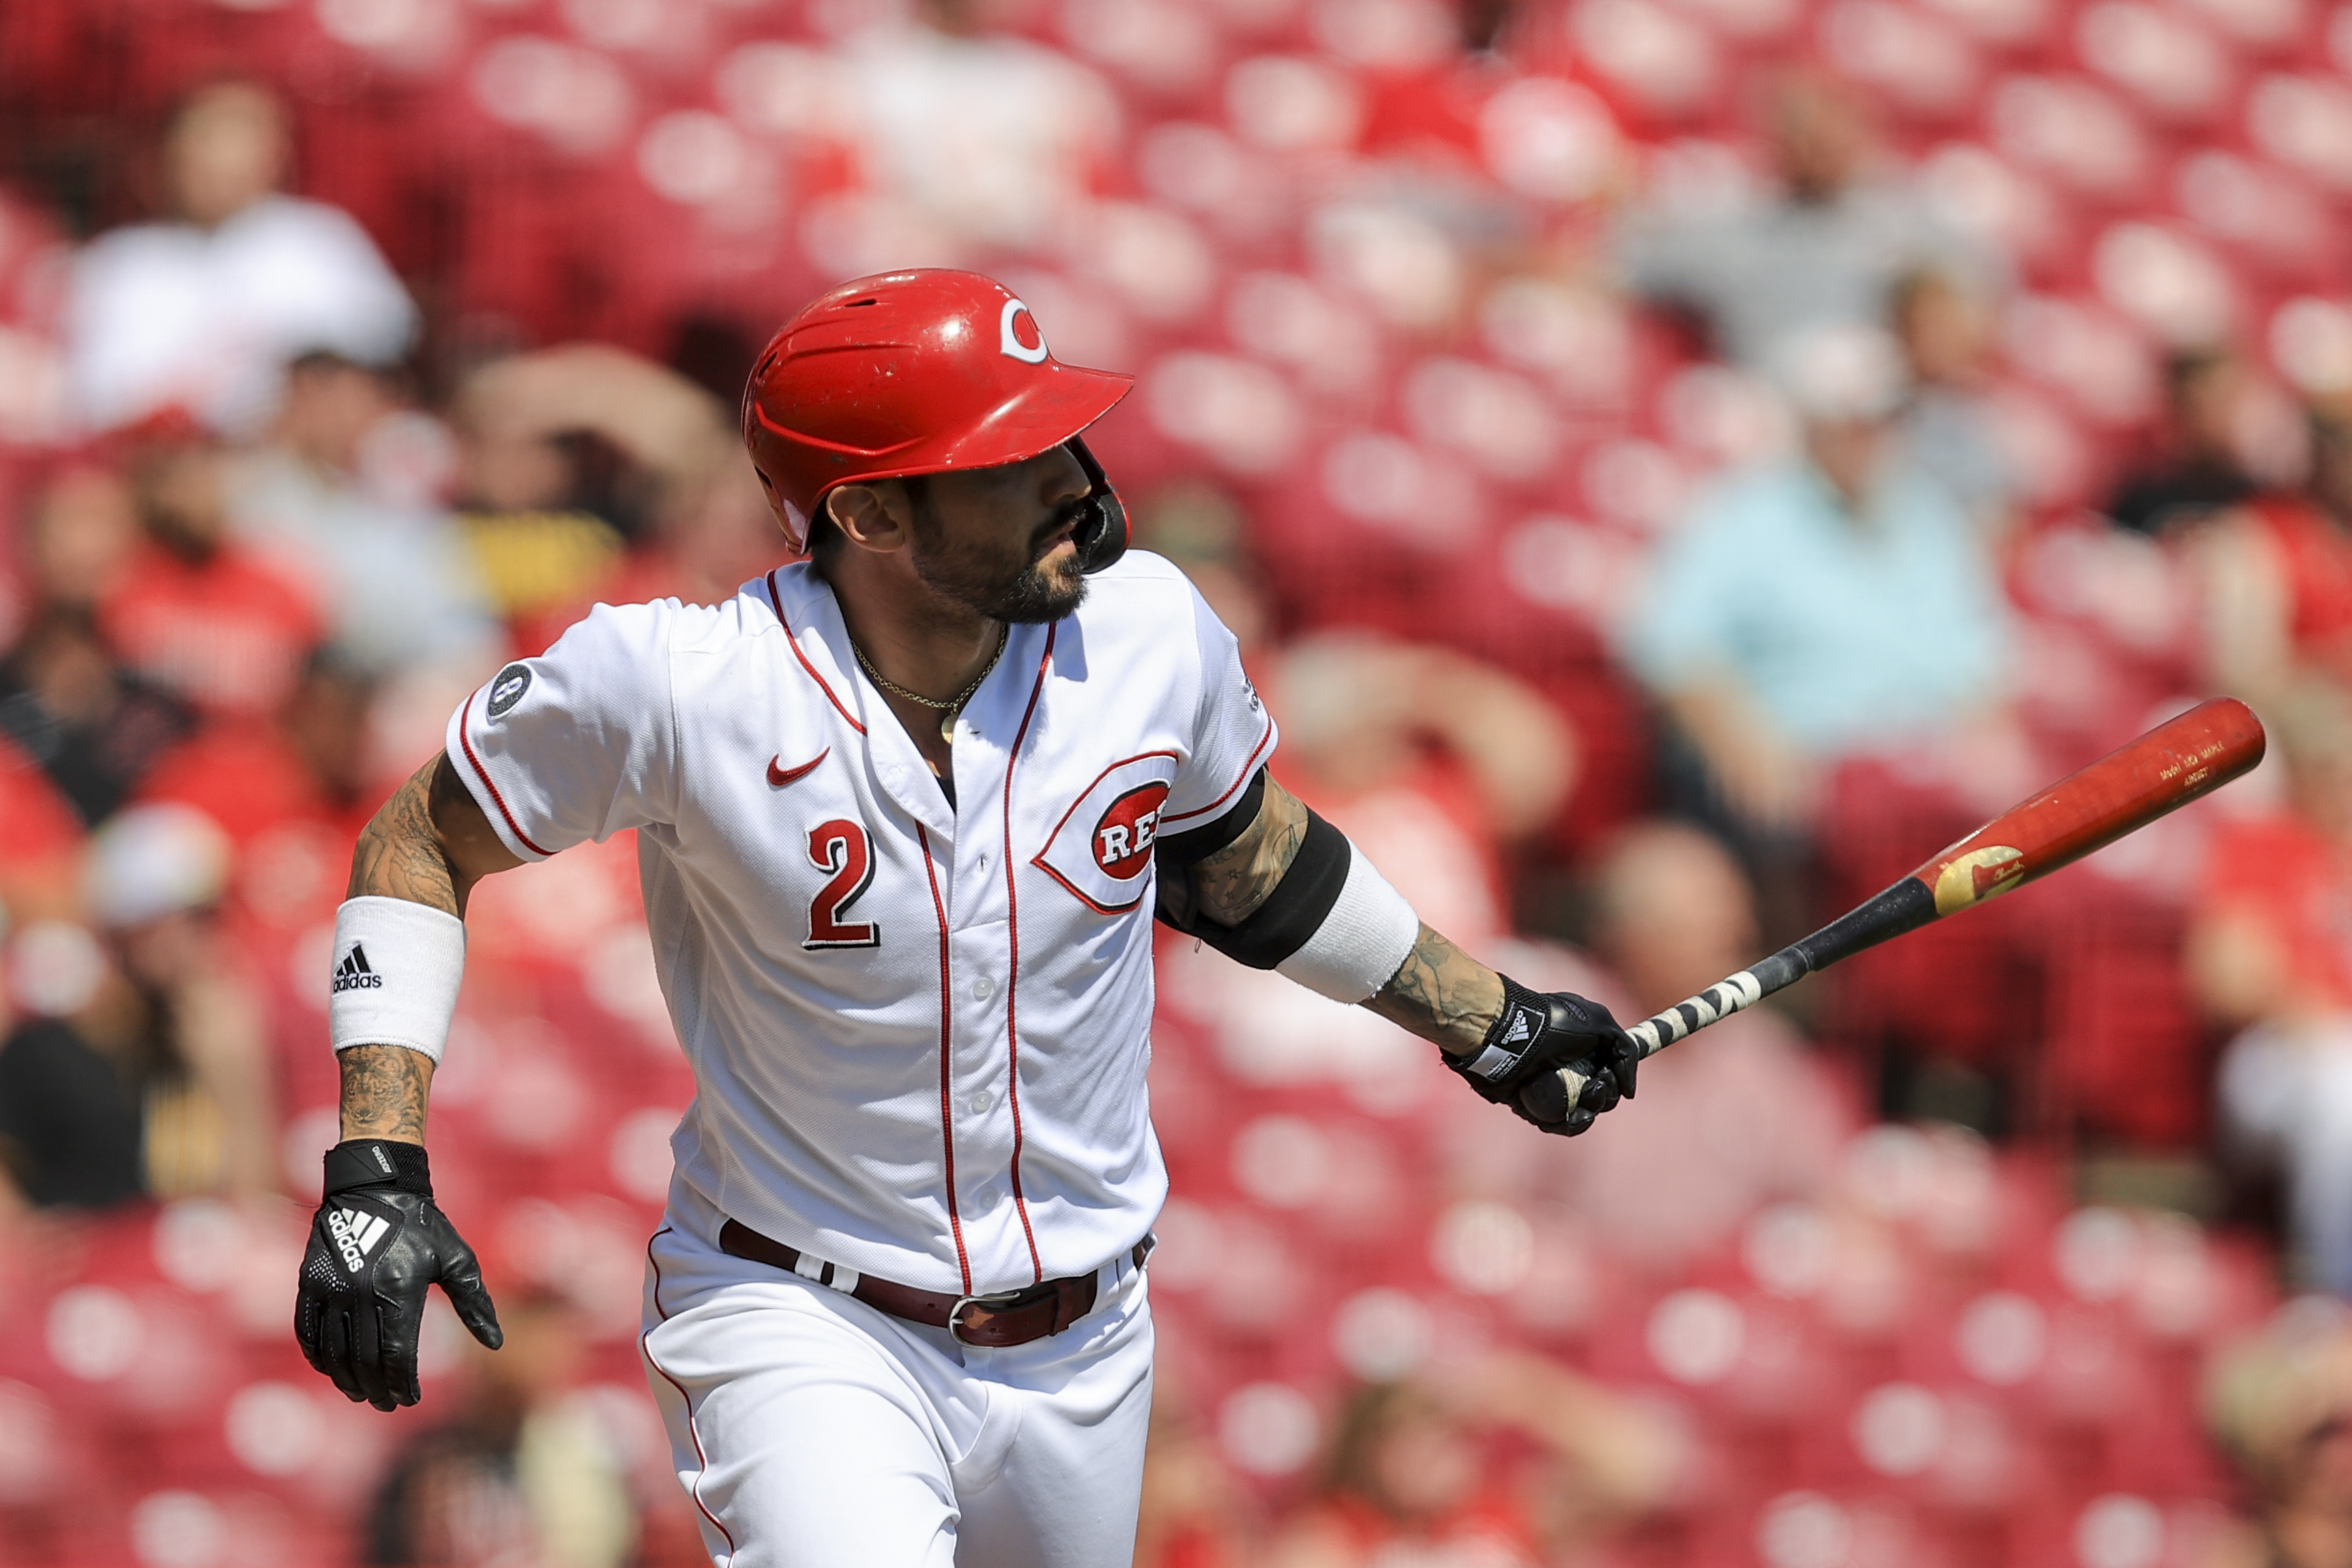 Nick Castellanos injury news: Reds OF has microfracture in wrist